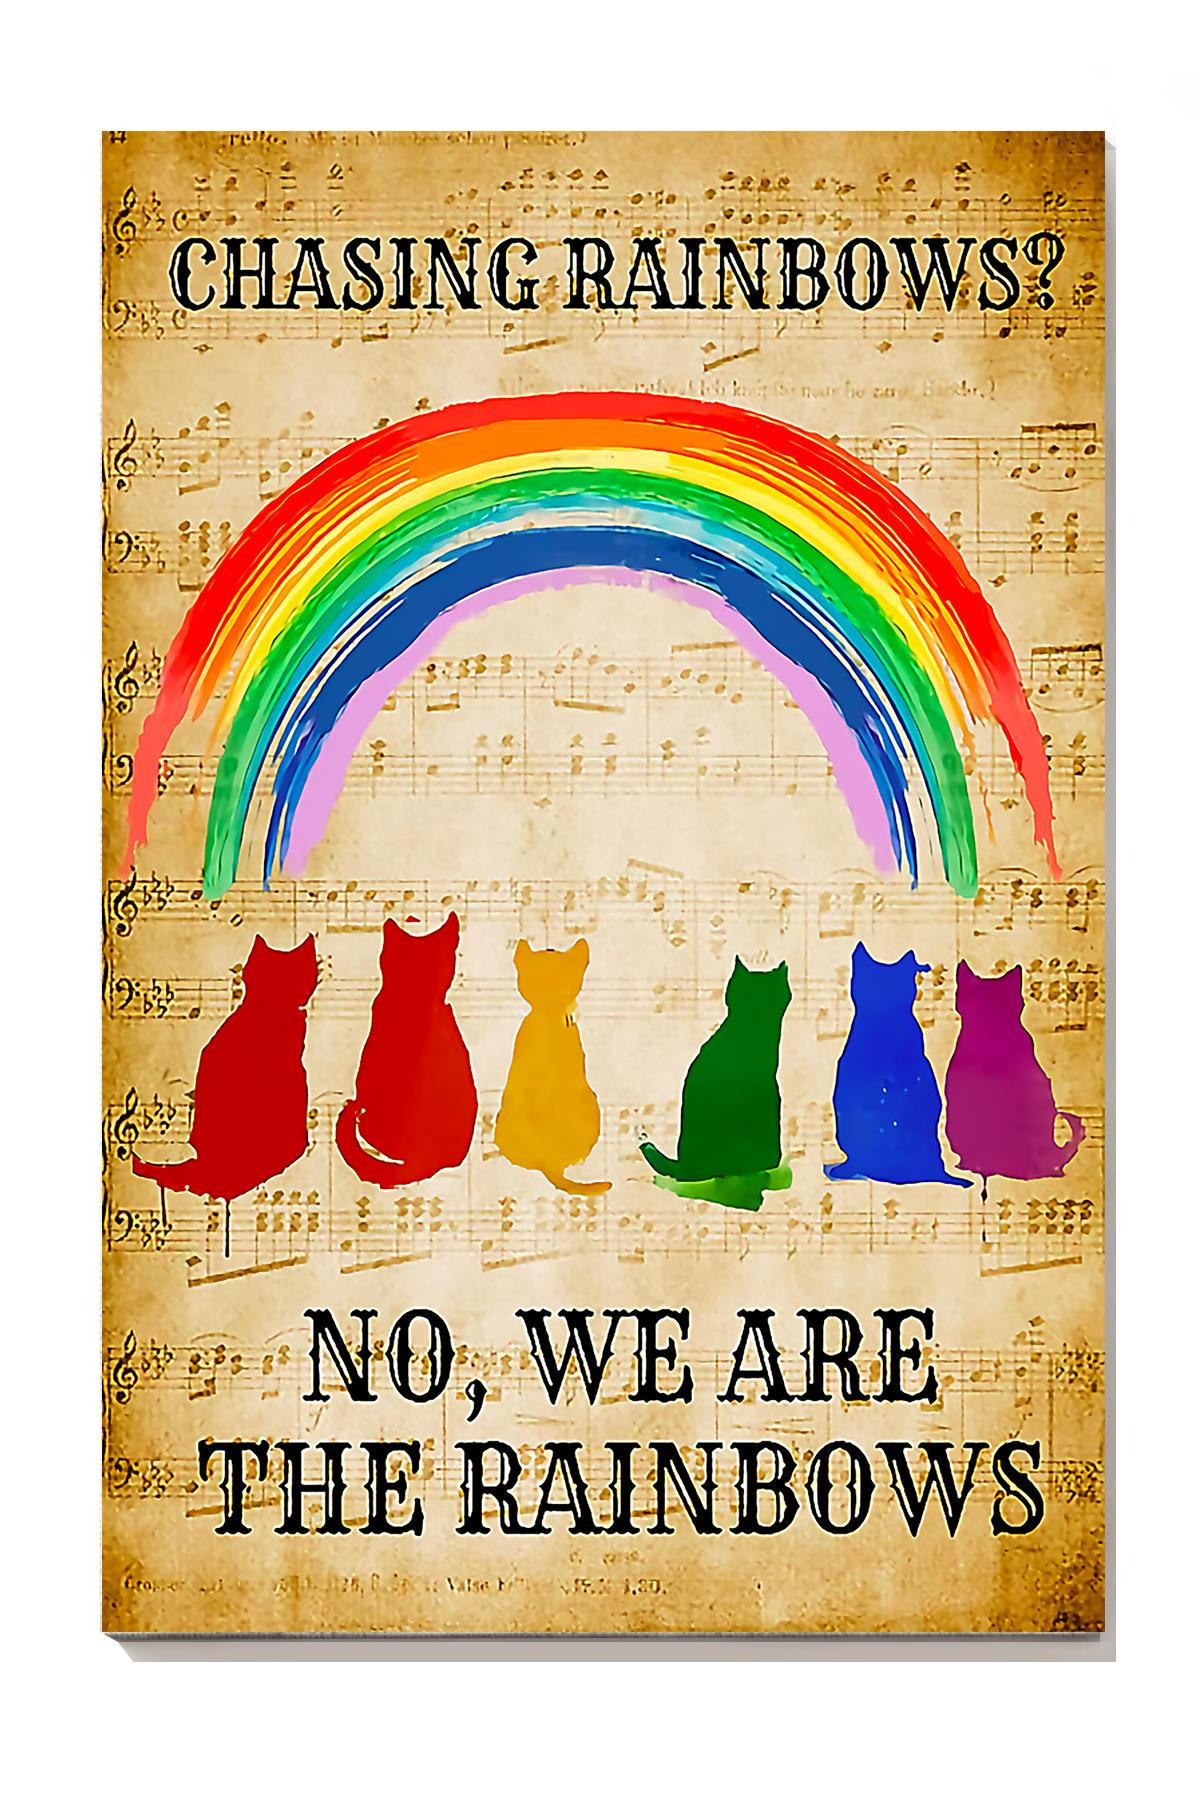 We Are The Rainbows Gallery Canvas Painting For Lgbt Lesbian Gay Idahot Pride Month Canvas Gallery Painting Wrapped Canvas Framed Prints, Canvas Paintings Wrapped Canvas 8x10